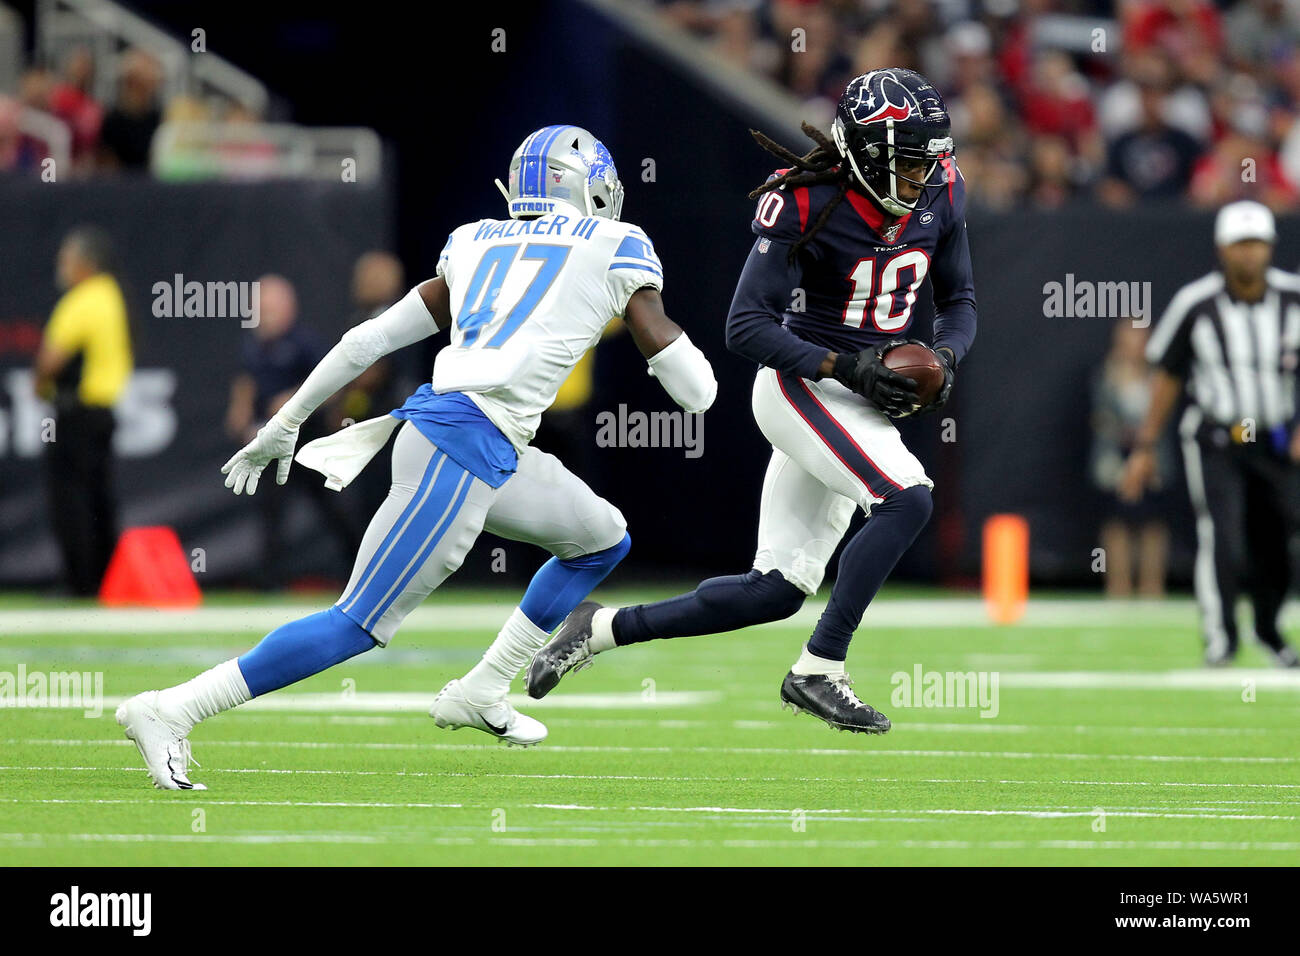 Houston, Texas, USA. 17th Aug, 2019. Houston Texans wide receiver DeAndre Hopkins (10, right) carries the ball after a pass reception while Detroit Lions defensive back Tracy Walker (47) pursues during the first quarter of the NFL preseason game between the Houston Texans and the Detroit Lions at NRG Stadium in Houston, TX on August 17, 2019. Credit: Erik Williams/ZUMA Wire/Alamy Live News Stock Photo